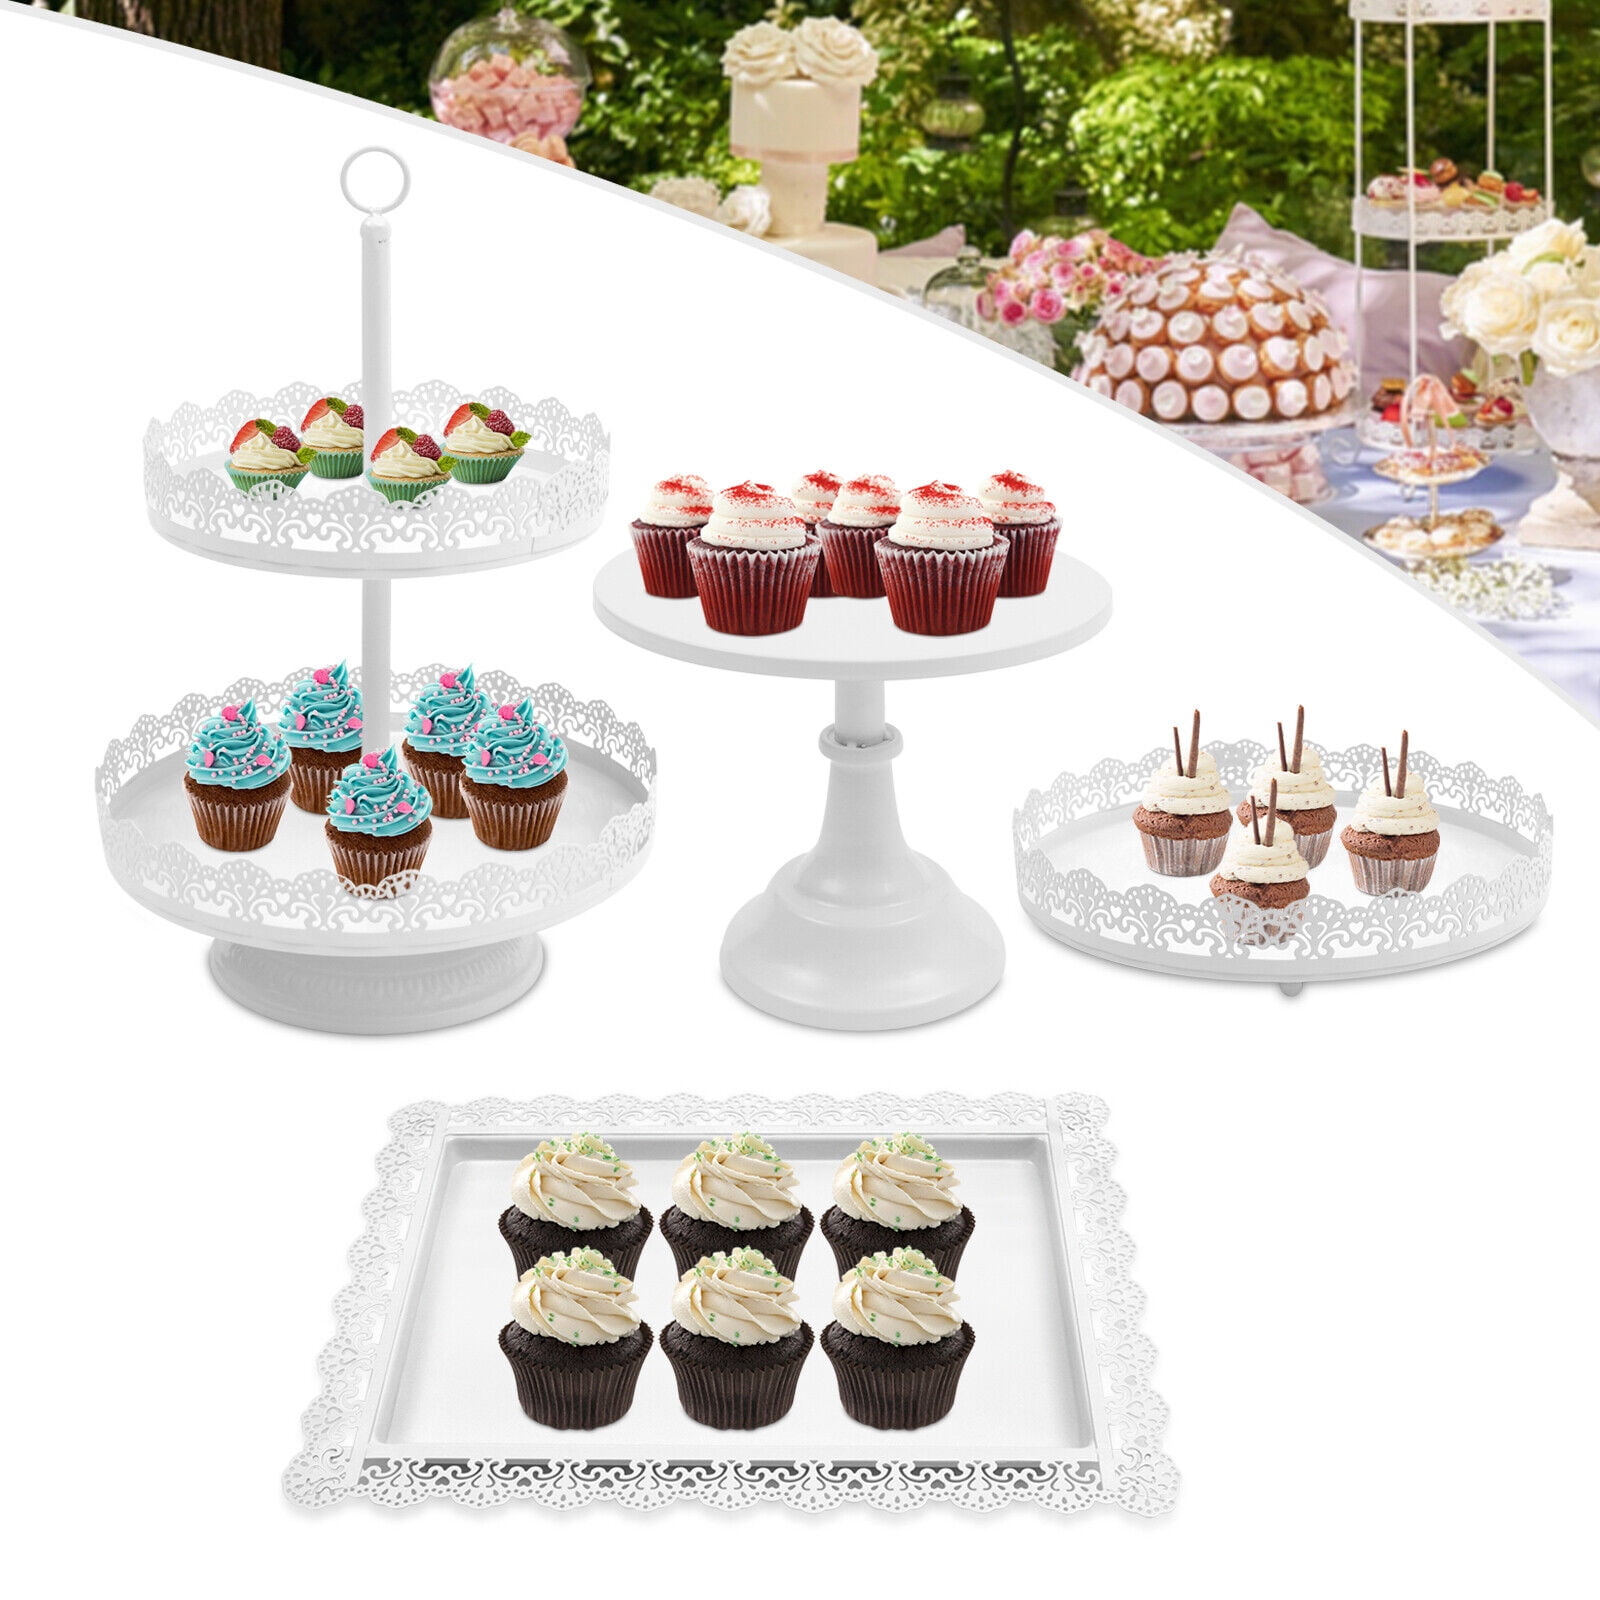 Cake Stand White with Metal Handles Multi-layer Dessert Table Hollow  Cupcake Display Afternoon Tea Pastry Fruit Tray T 別倉庫からの配送